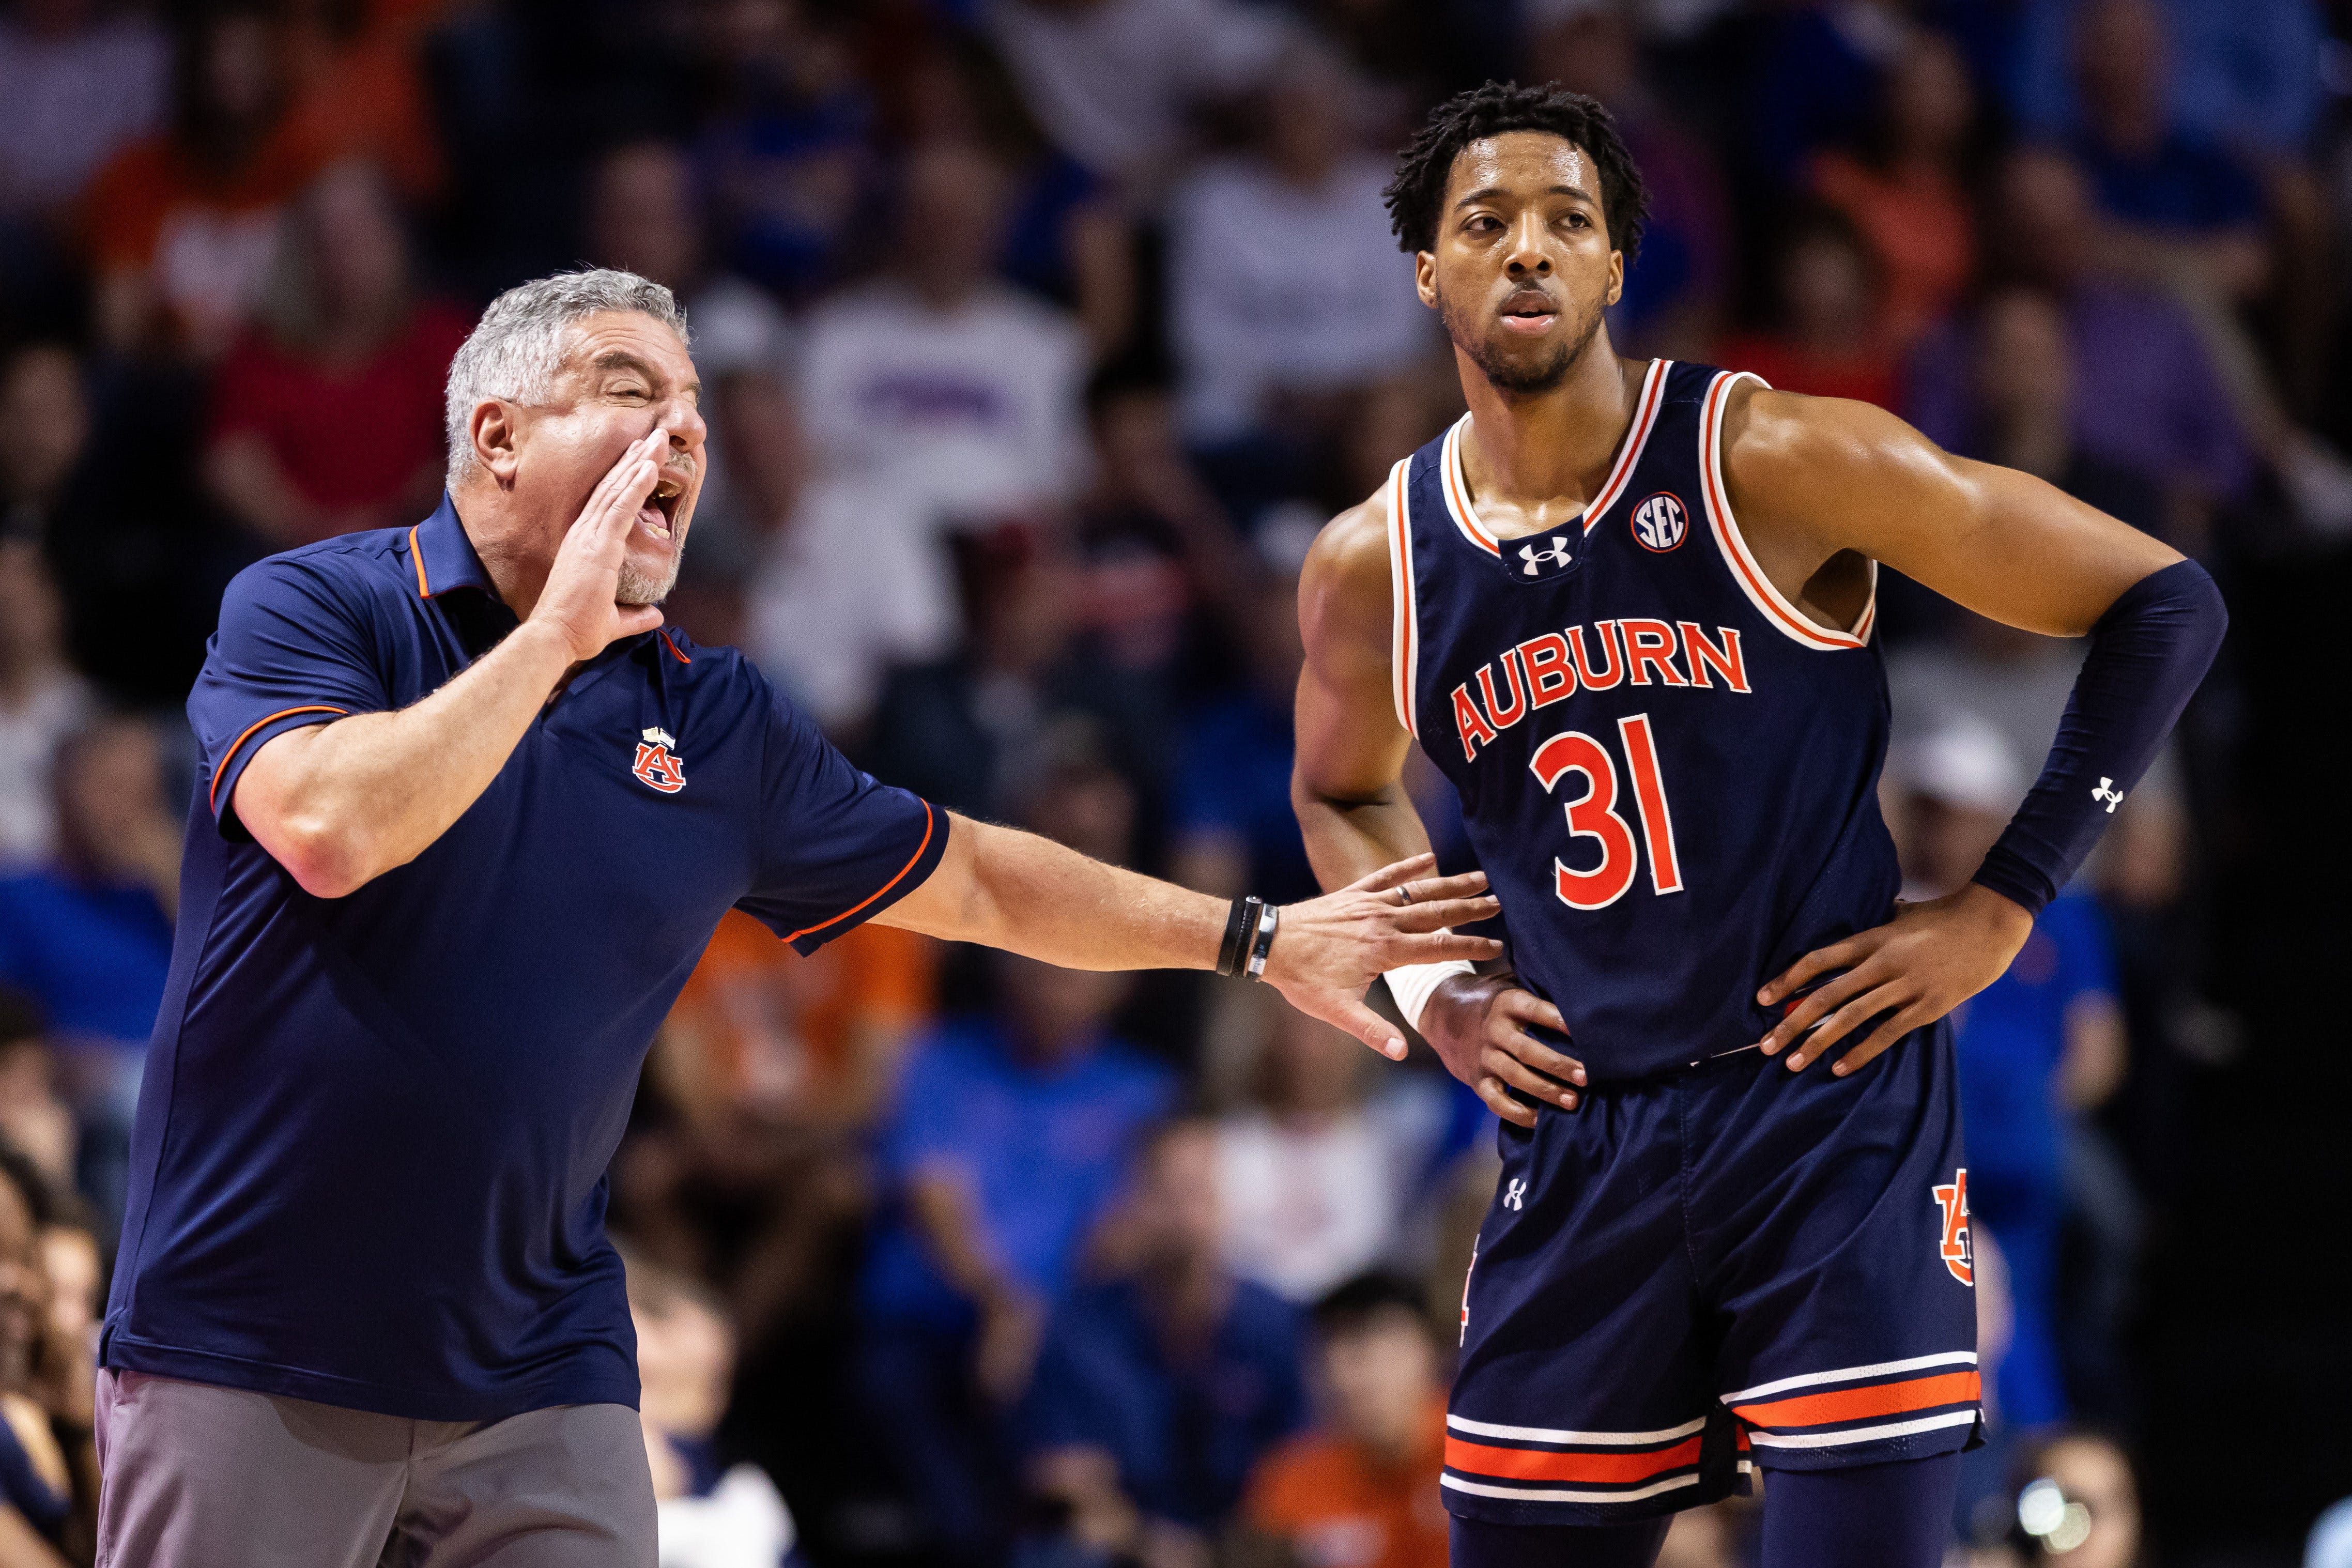 Bruce Pearl hoping for big leap from Chaney Johnson in year two